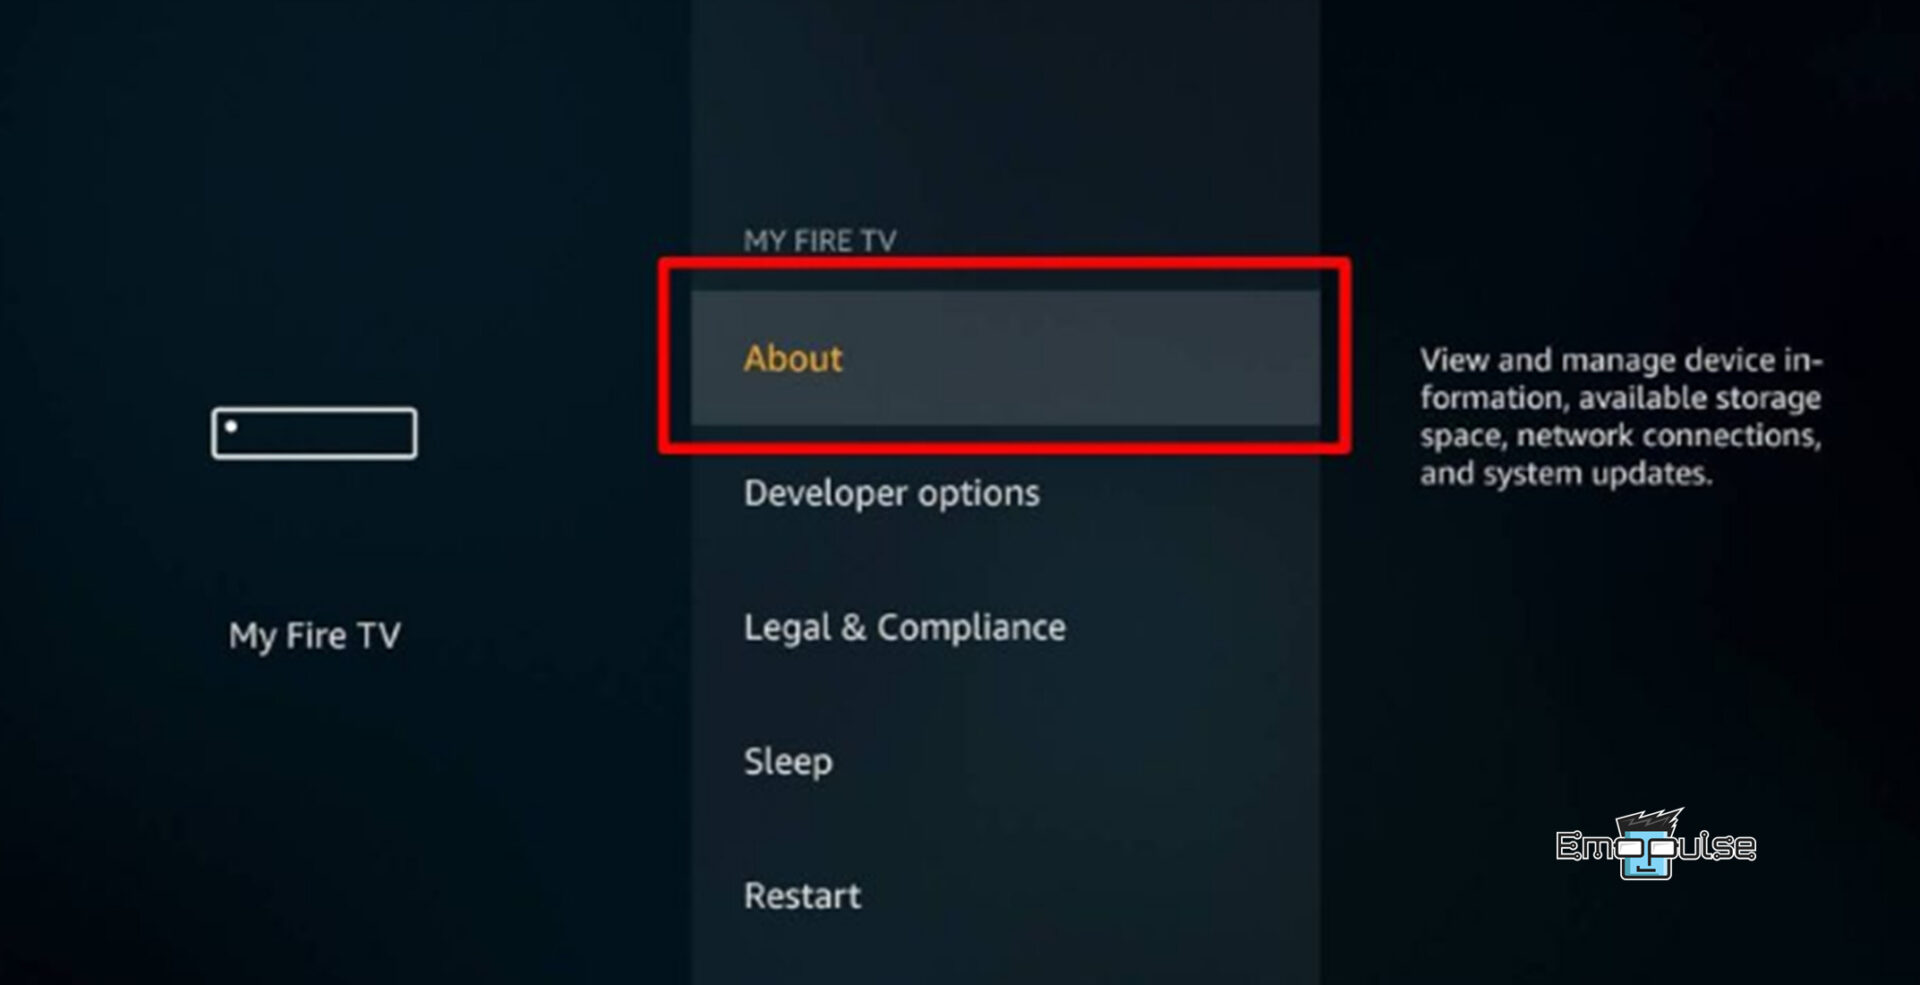 Update firmware to solve Hulu keeps crashing issue